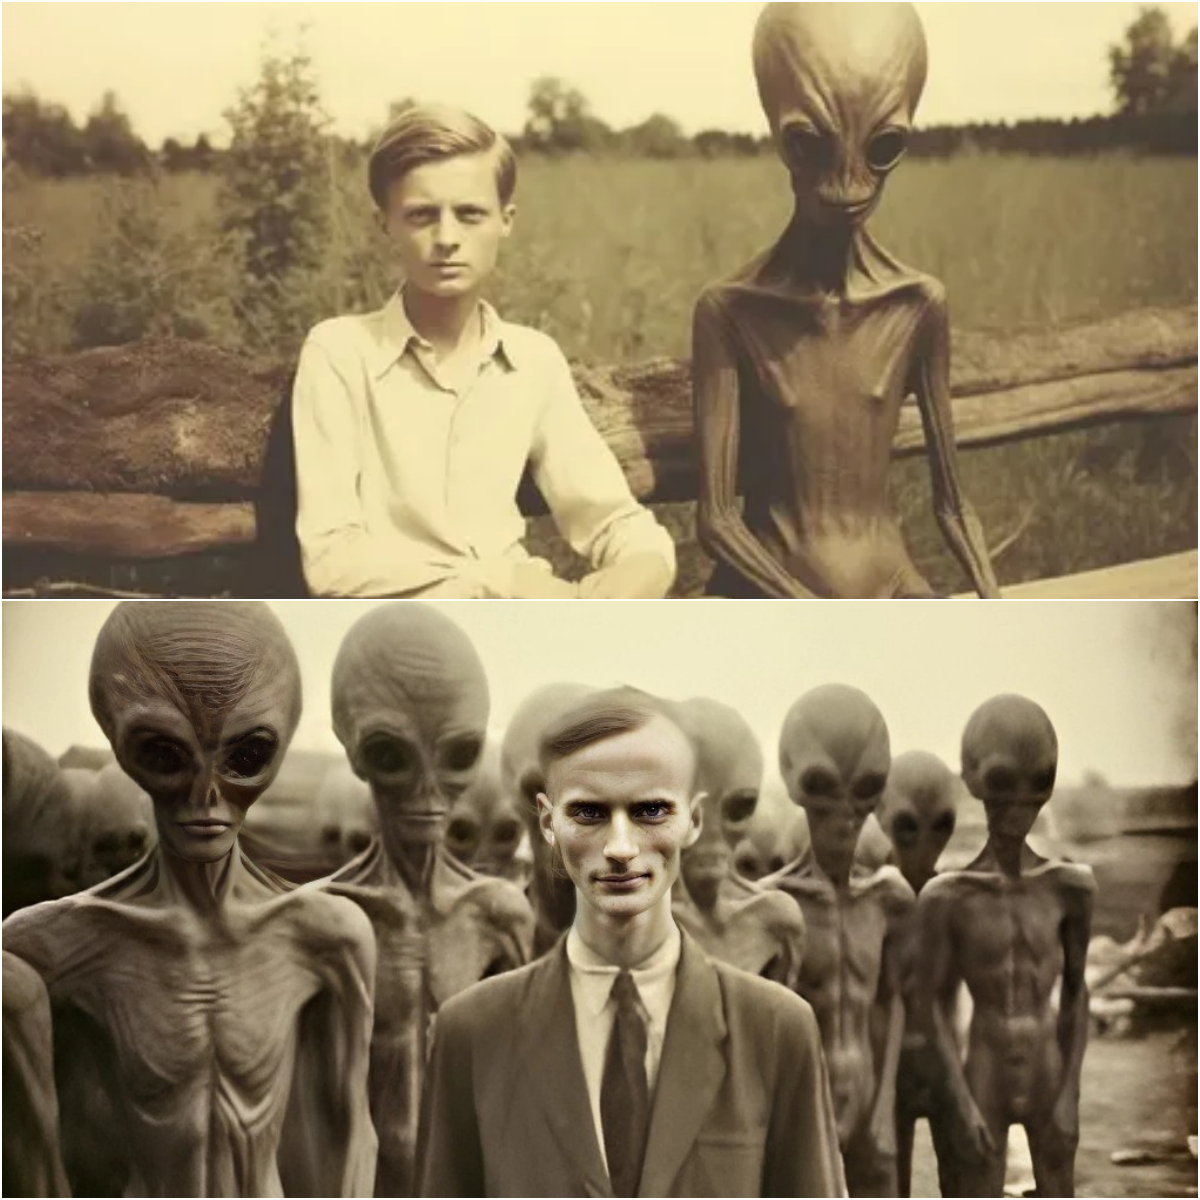 Ancient Photo Reveals Secret Interview with Alien in Hidden Chamber - Mind-Blowing Evidence!